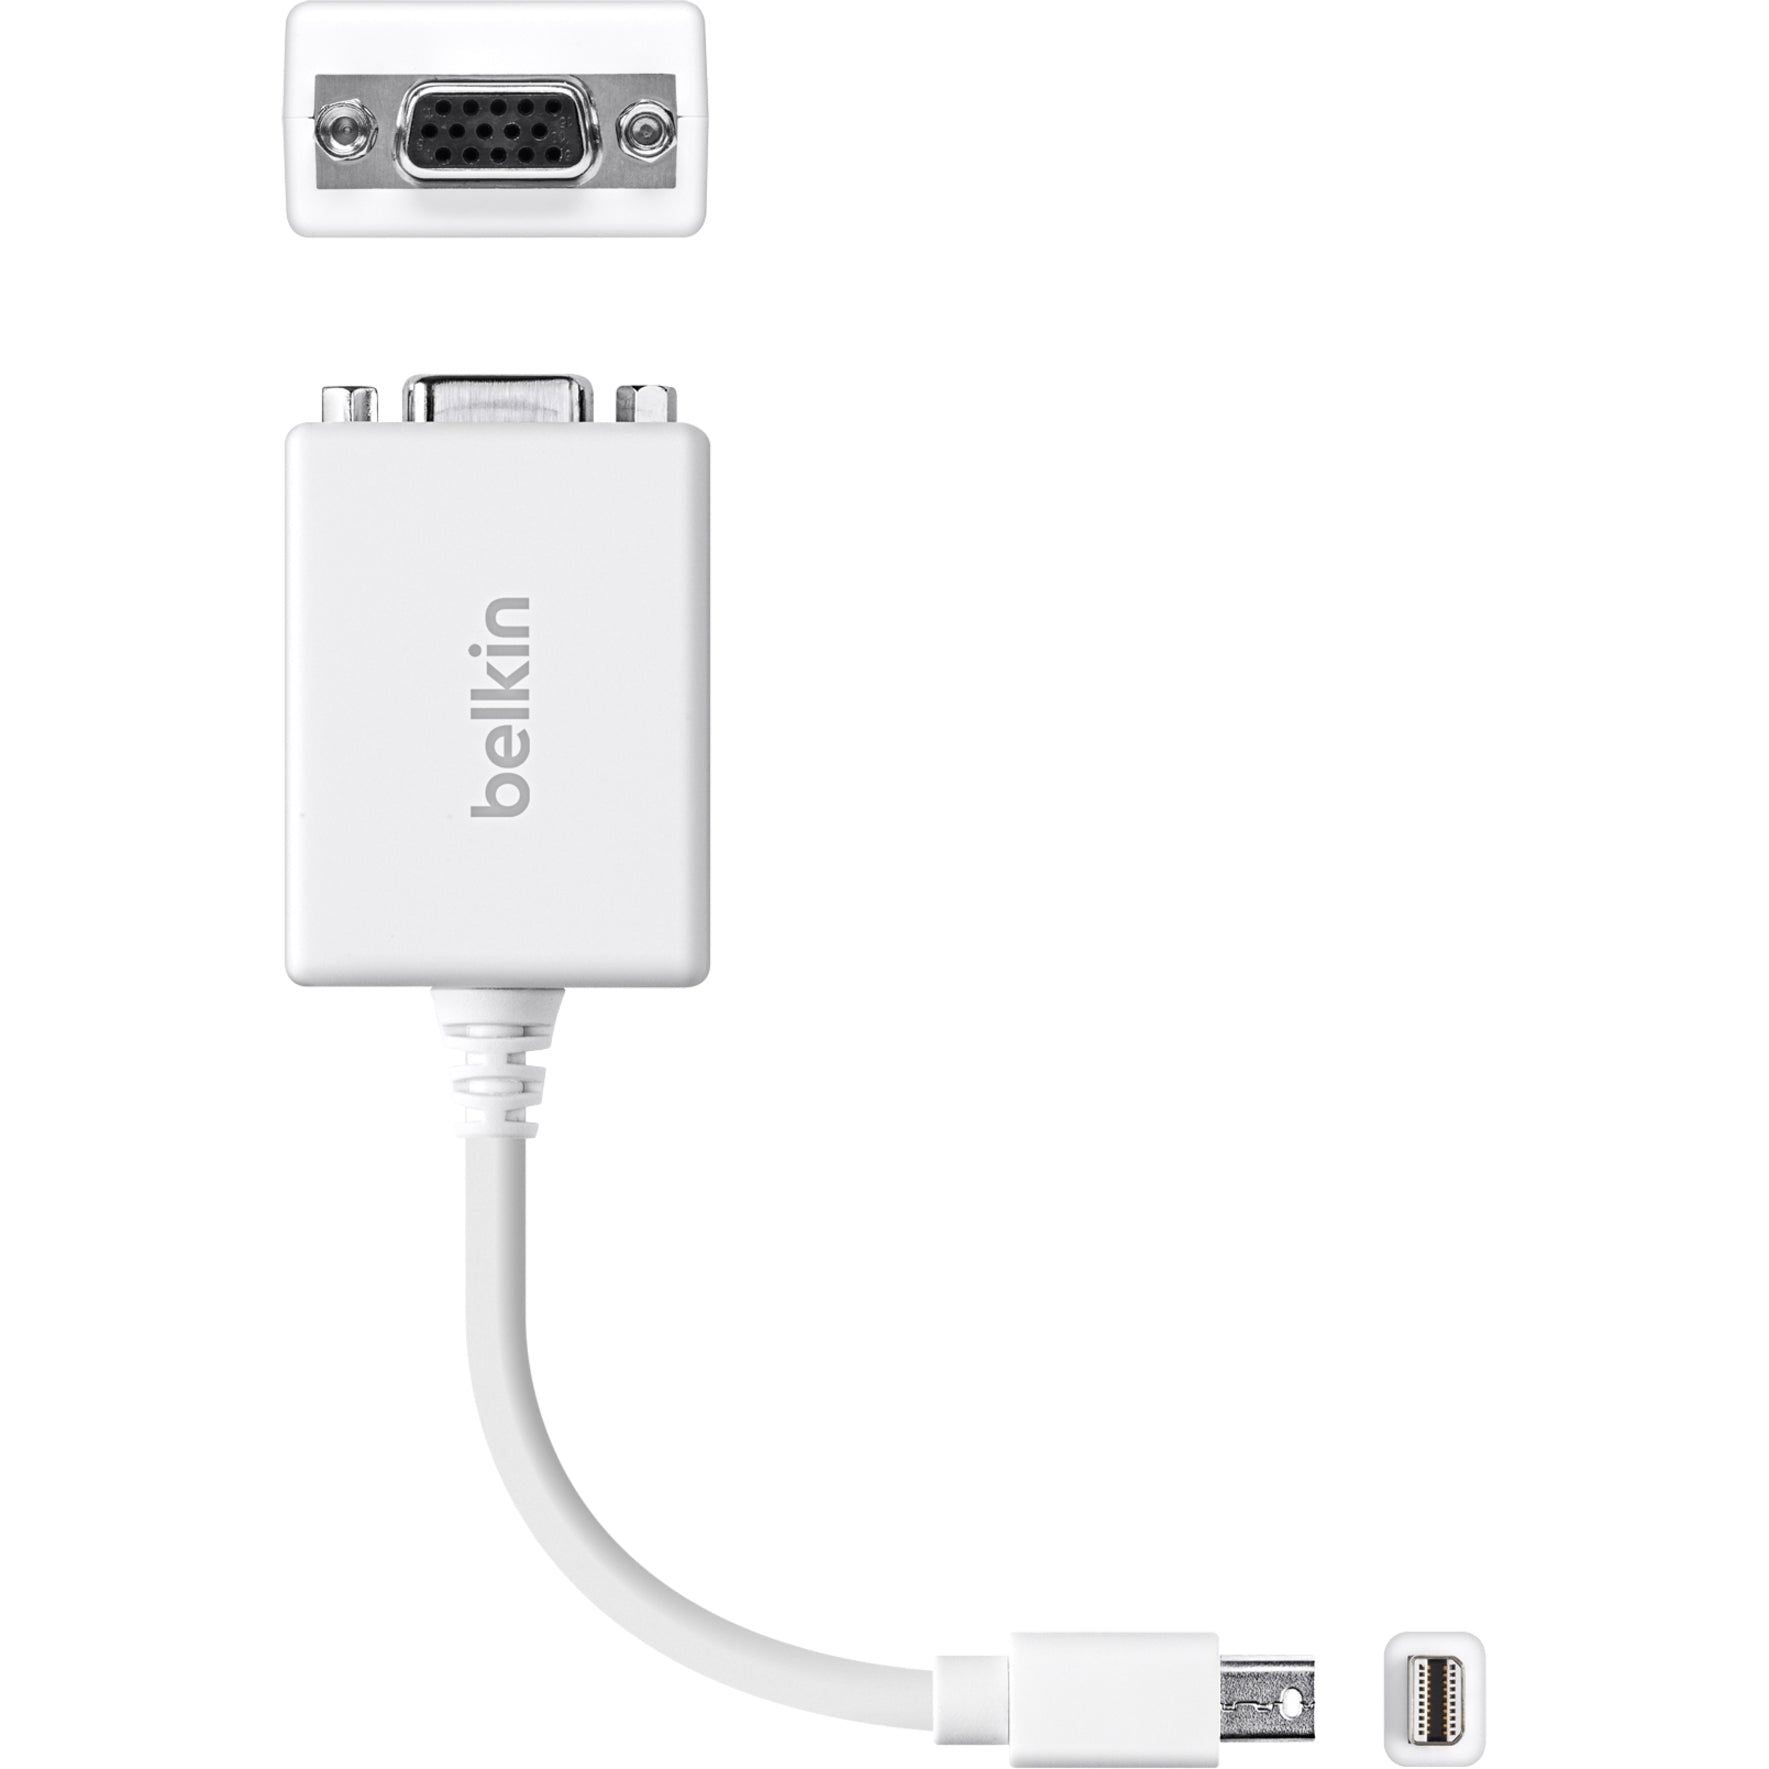 Belkin F2CD049B Mini DisplayPort/VGA Video Cable, Connect Your Devices with Ease